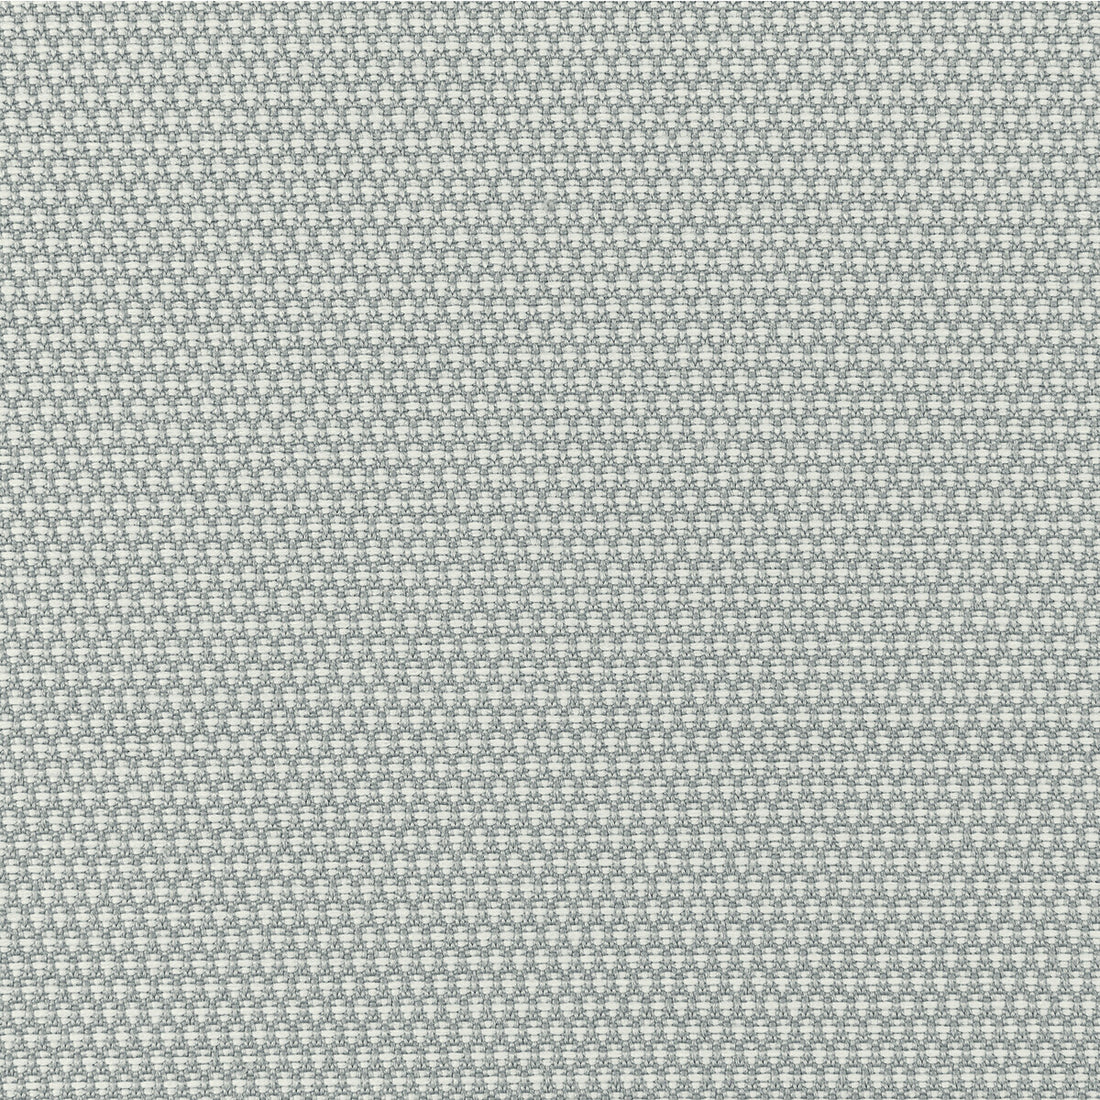 Mobilize fabric in arctic color - pattern 36256.11.0 - by Kravet Contract in the Supreen collection